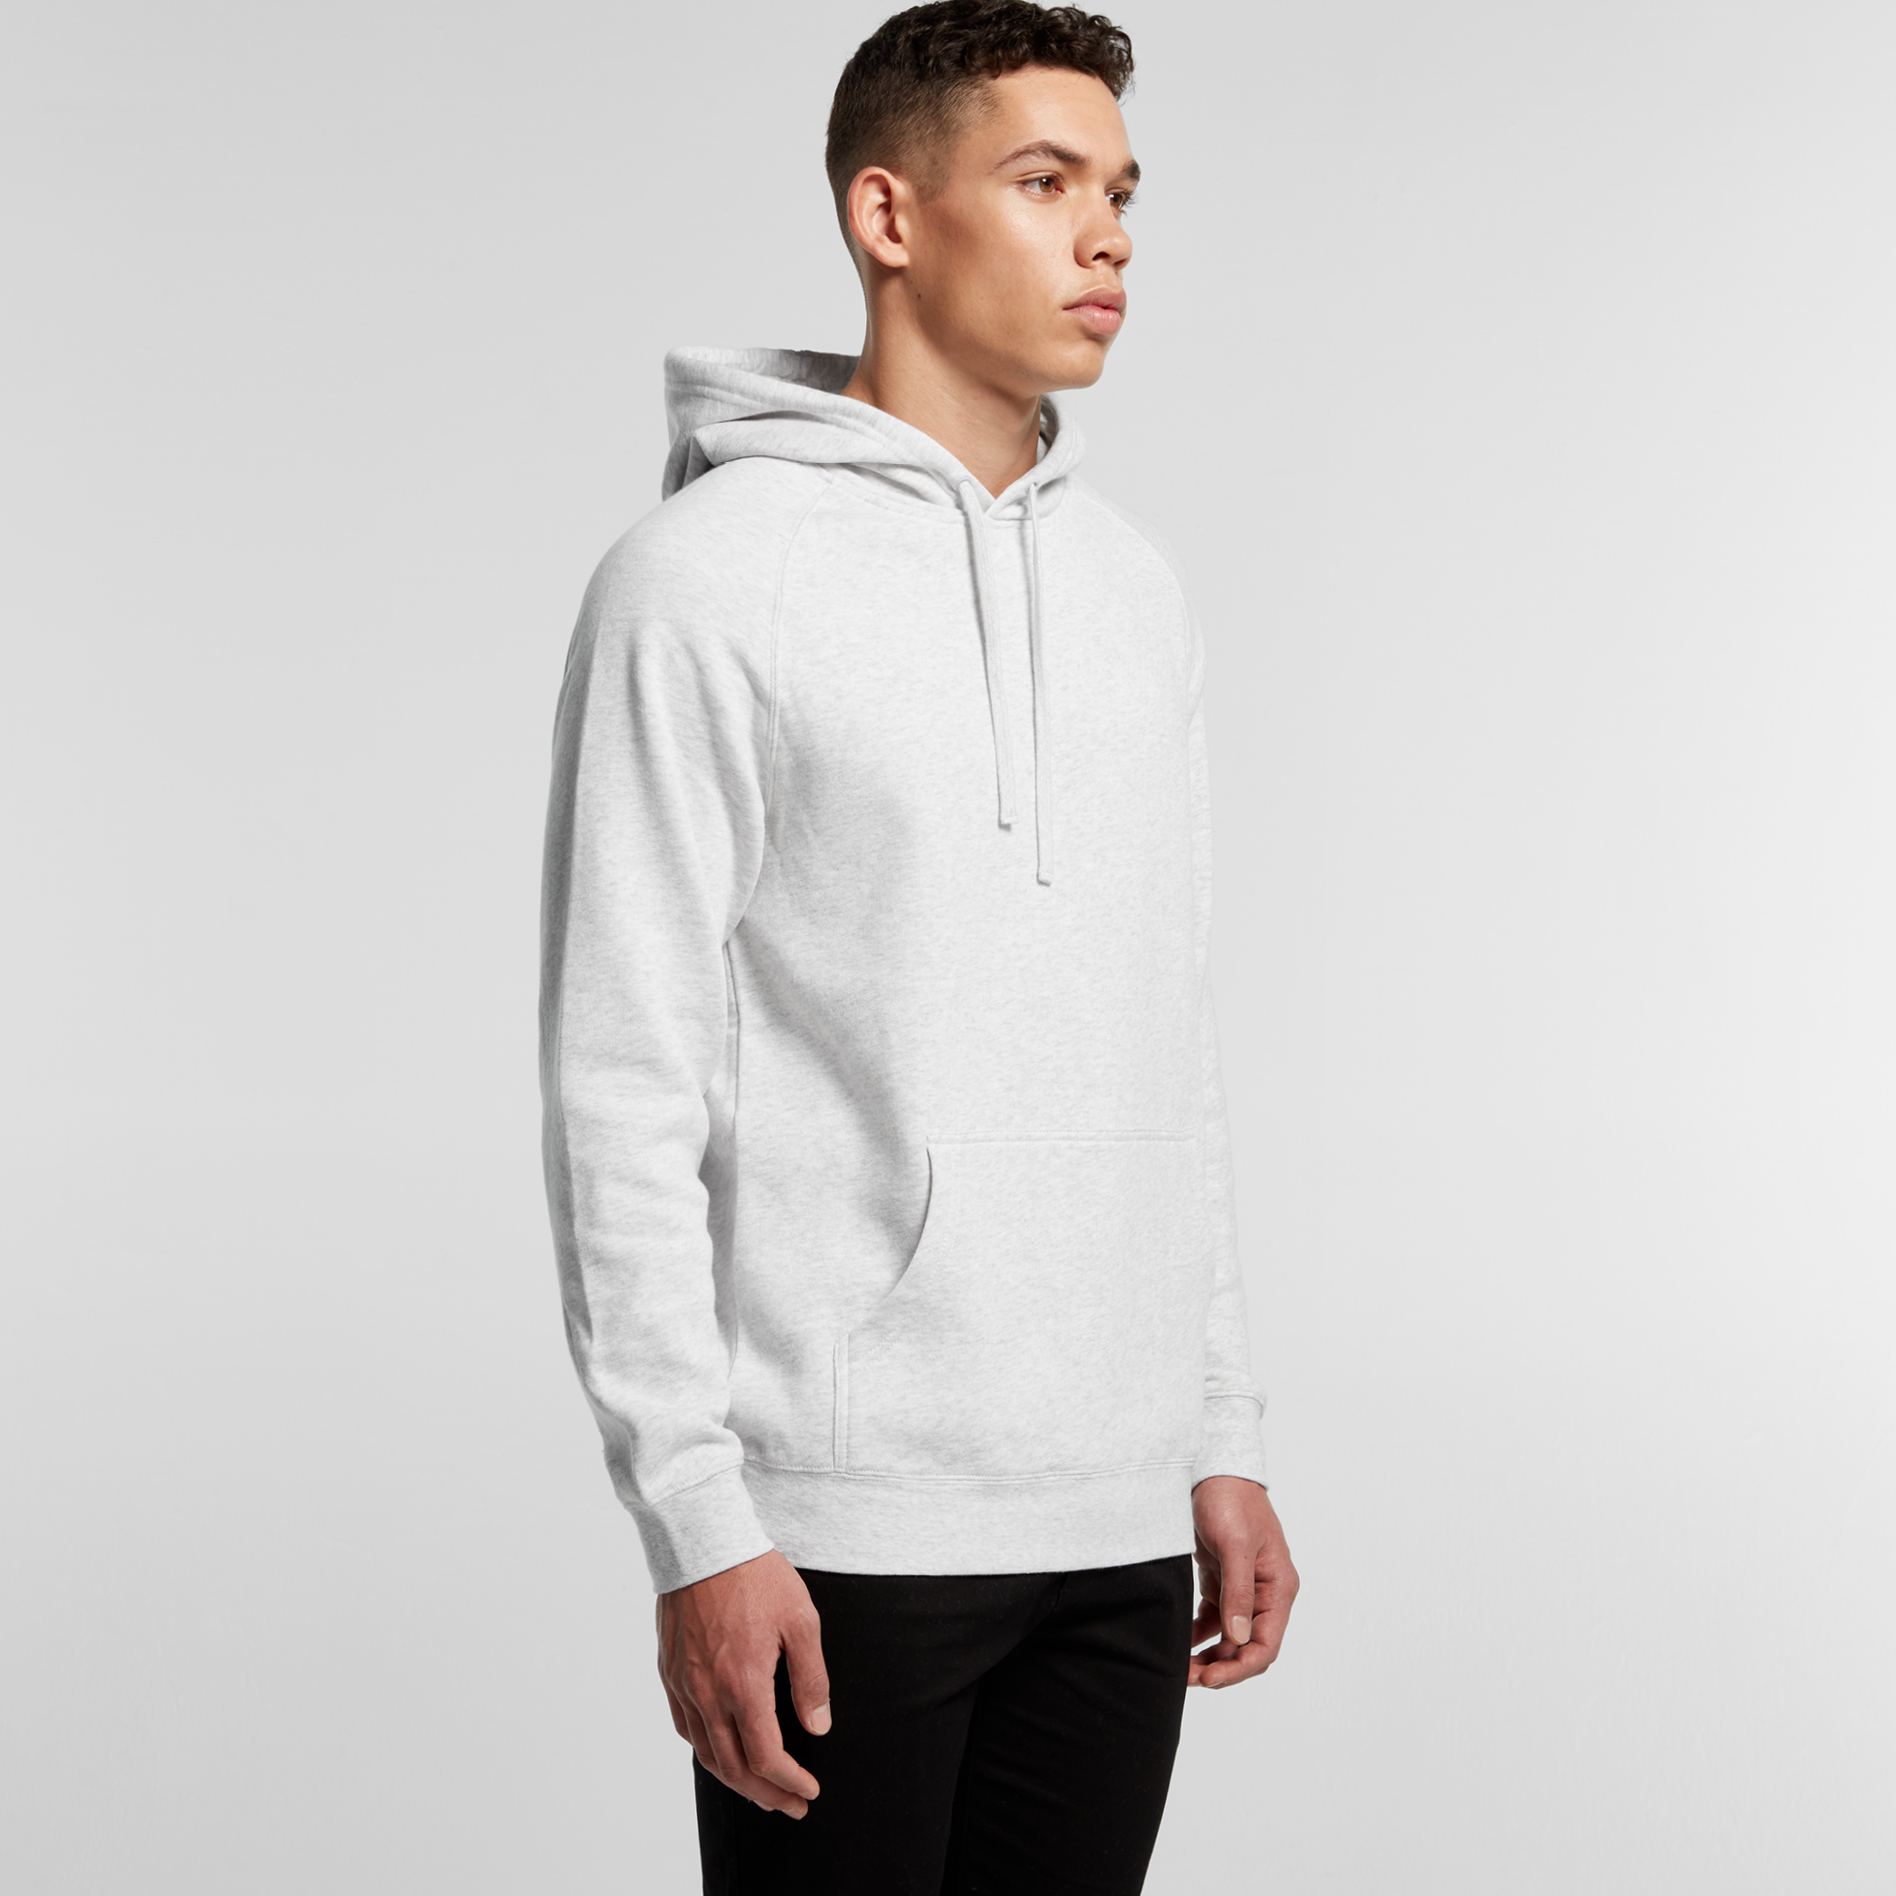 Mens Supply Hood | AS Colour | Withers and Co